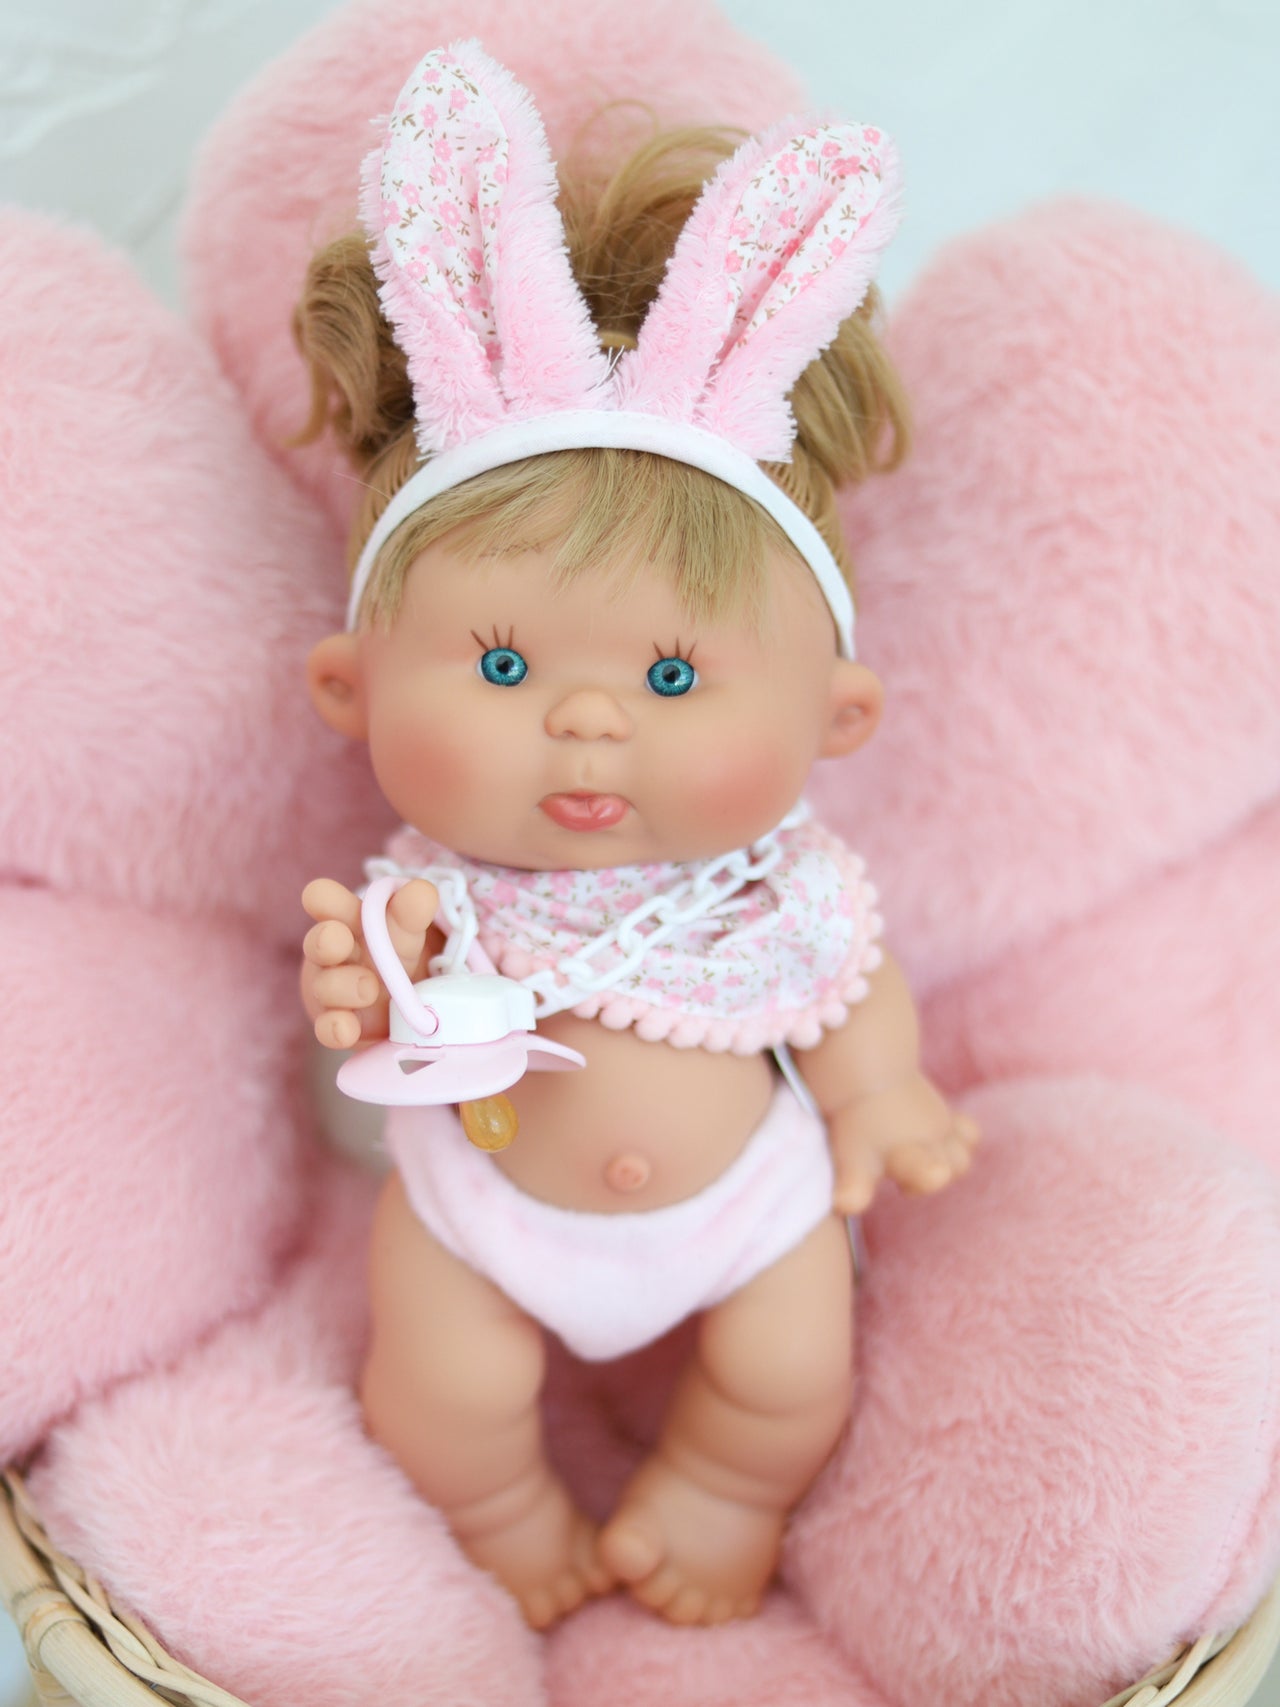 Iris - Easter Bunny Pepotes 10.2" Pouty Blonde Girl Doll